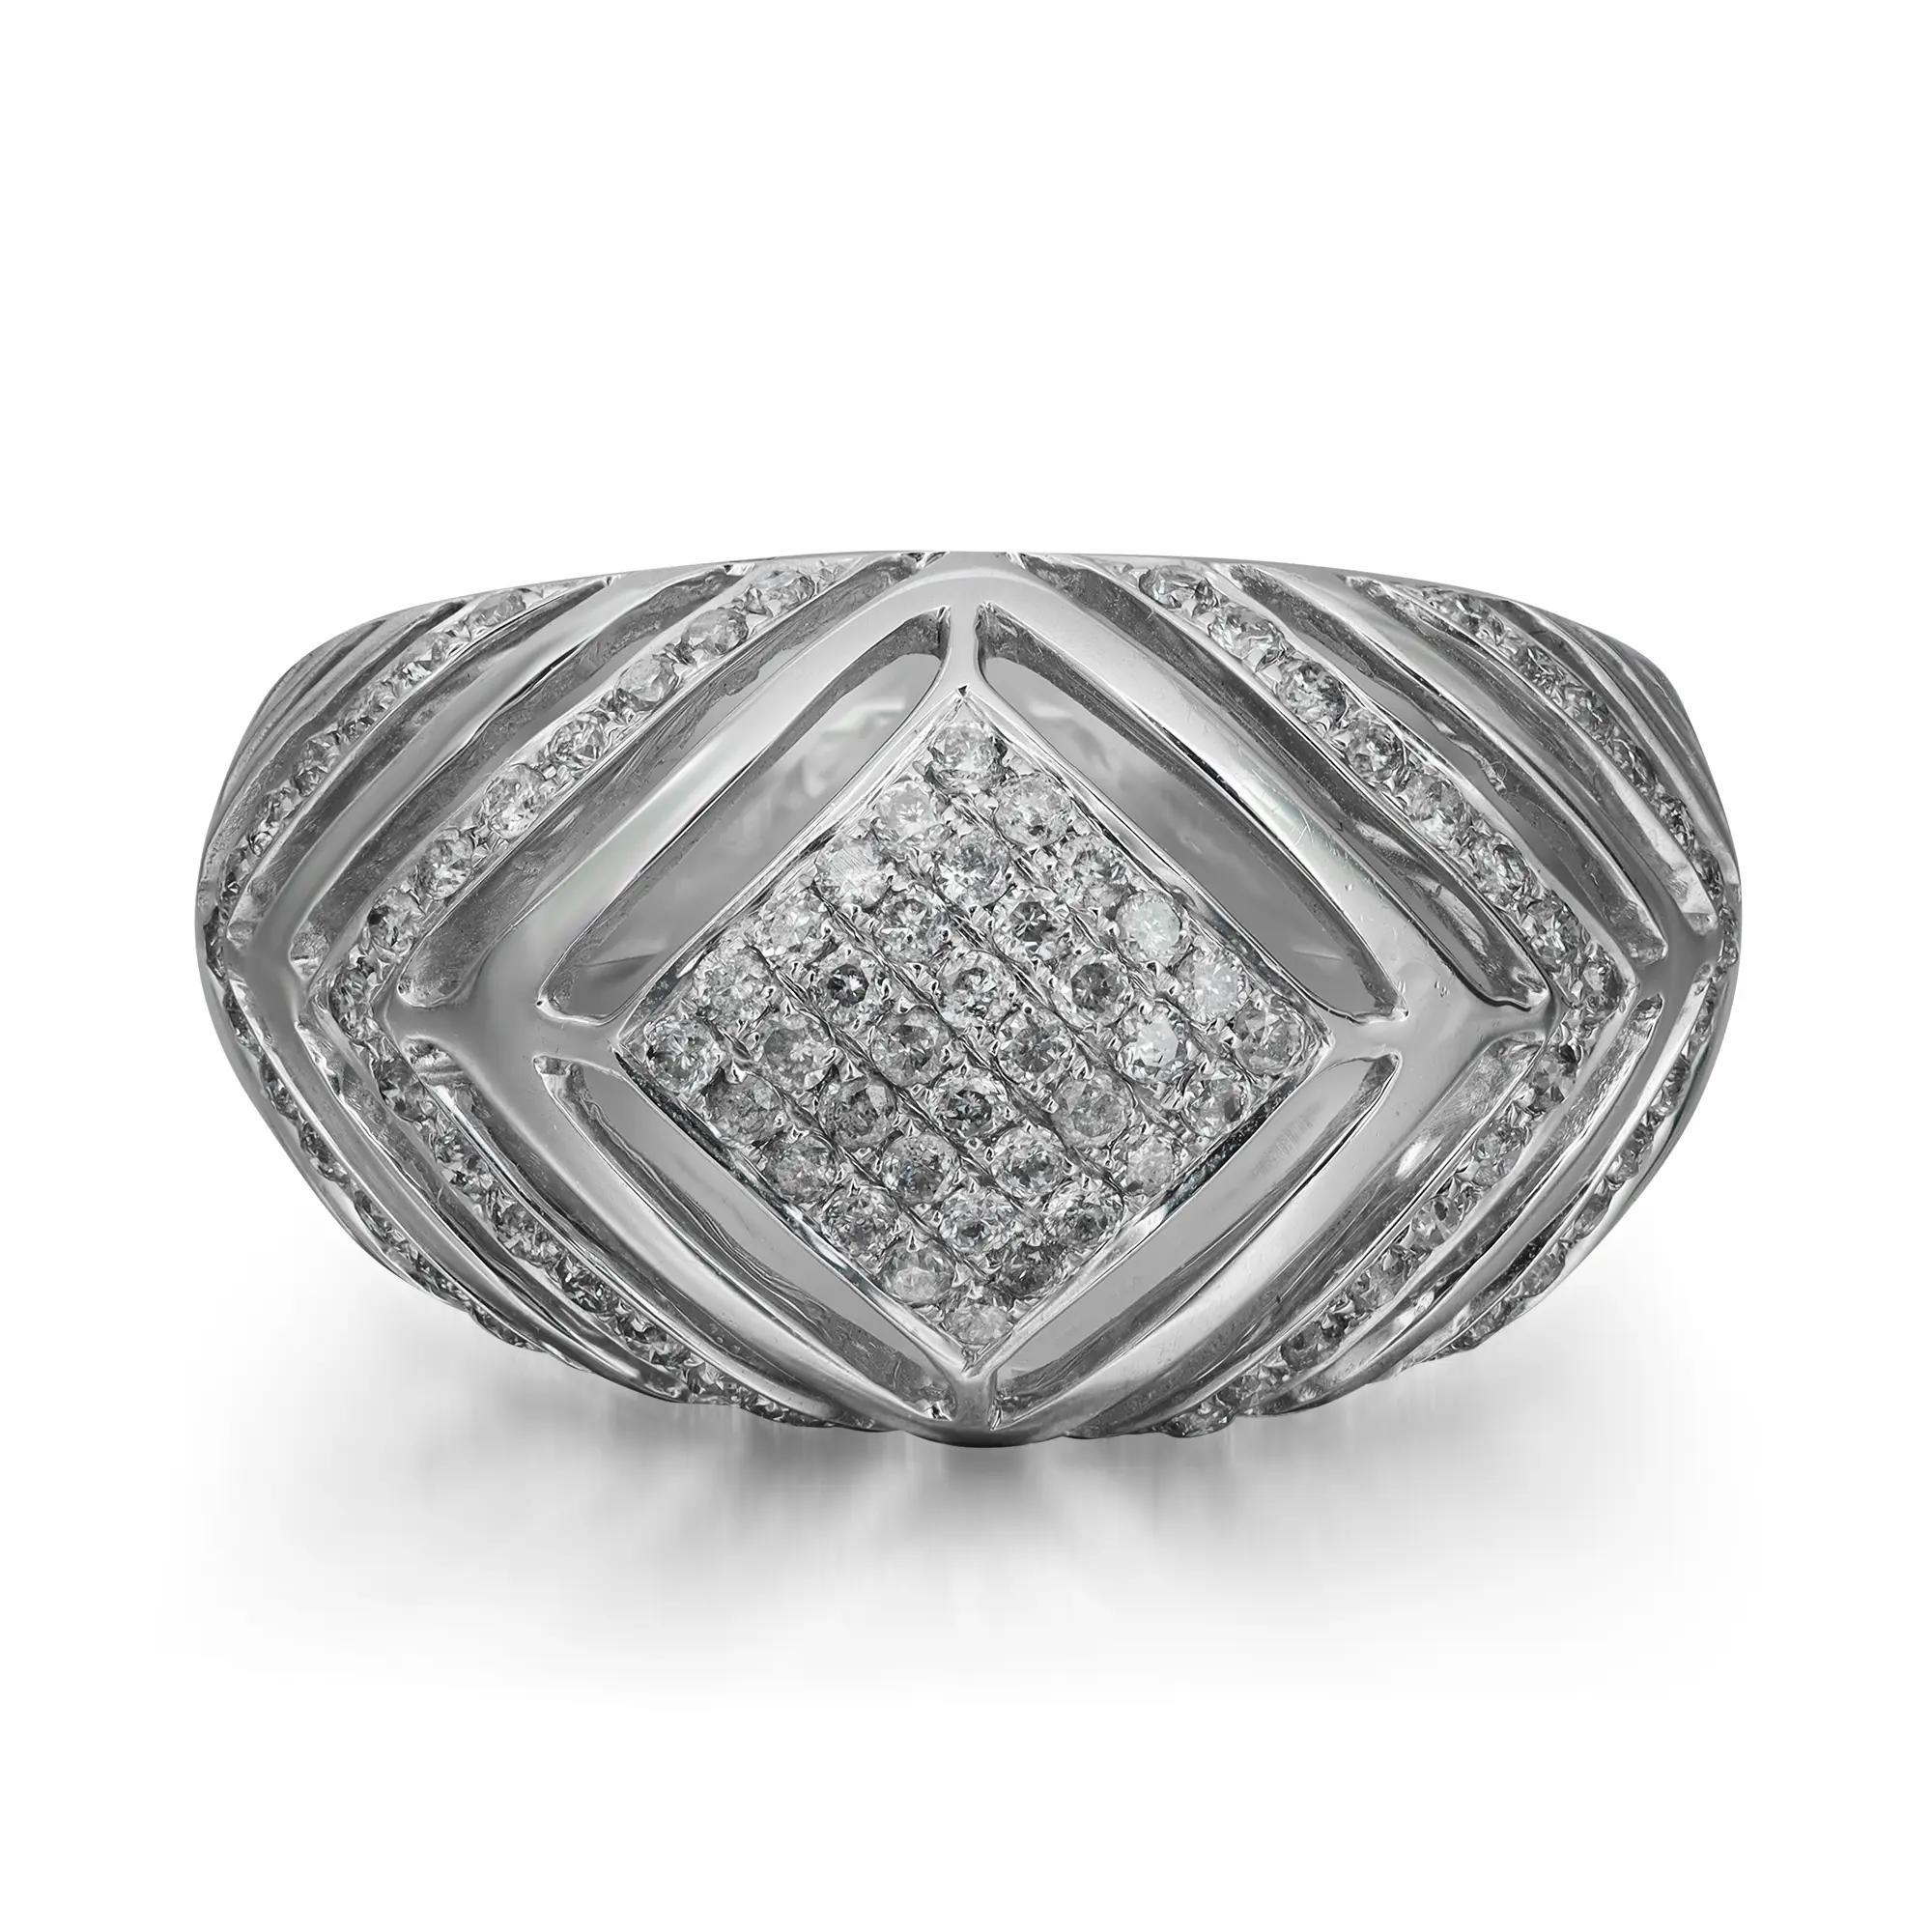 Modern 0.55Cttw Pave Set Round Cut Diamond Ladies Cocktail Ring 14K White Gold Size 7.5 For Sale